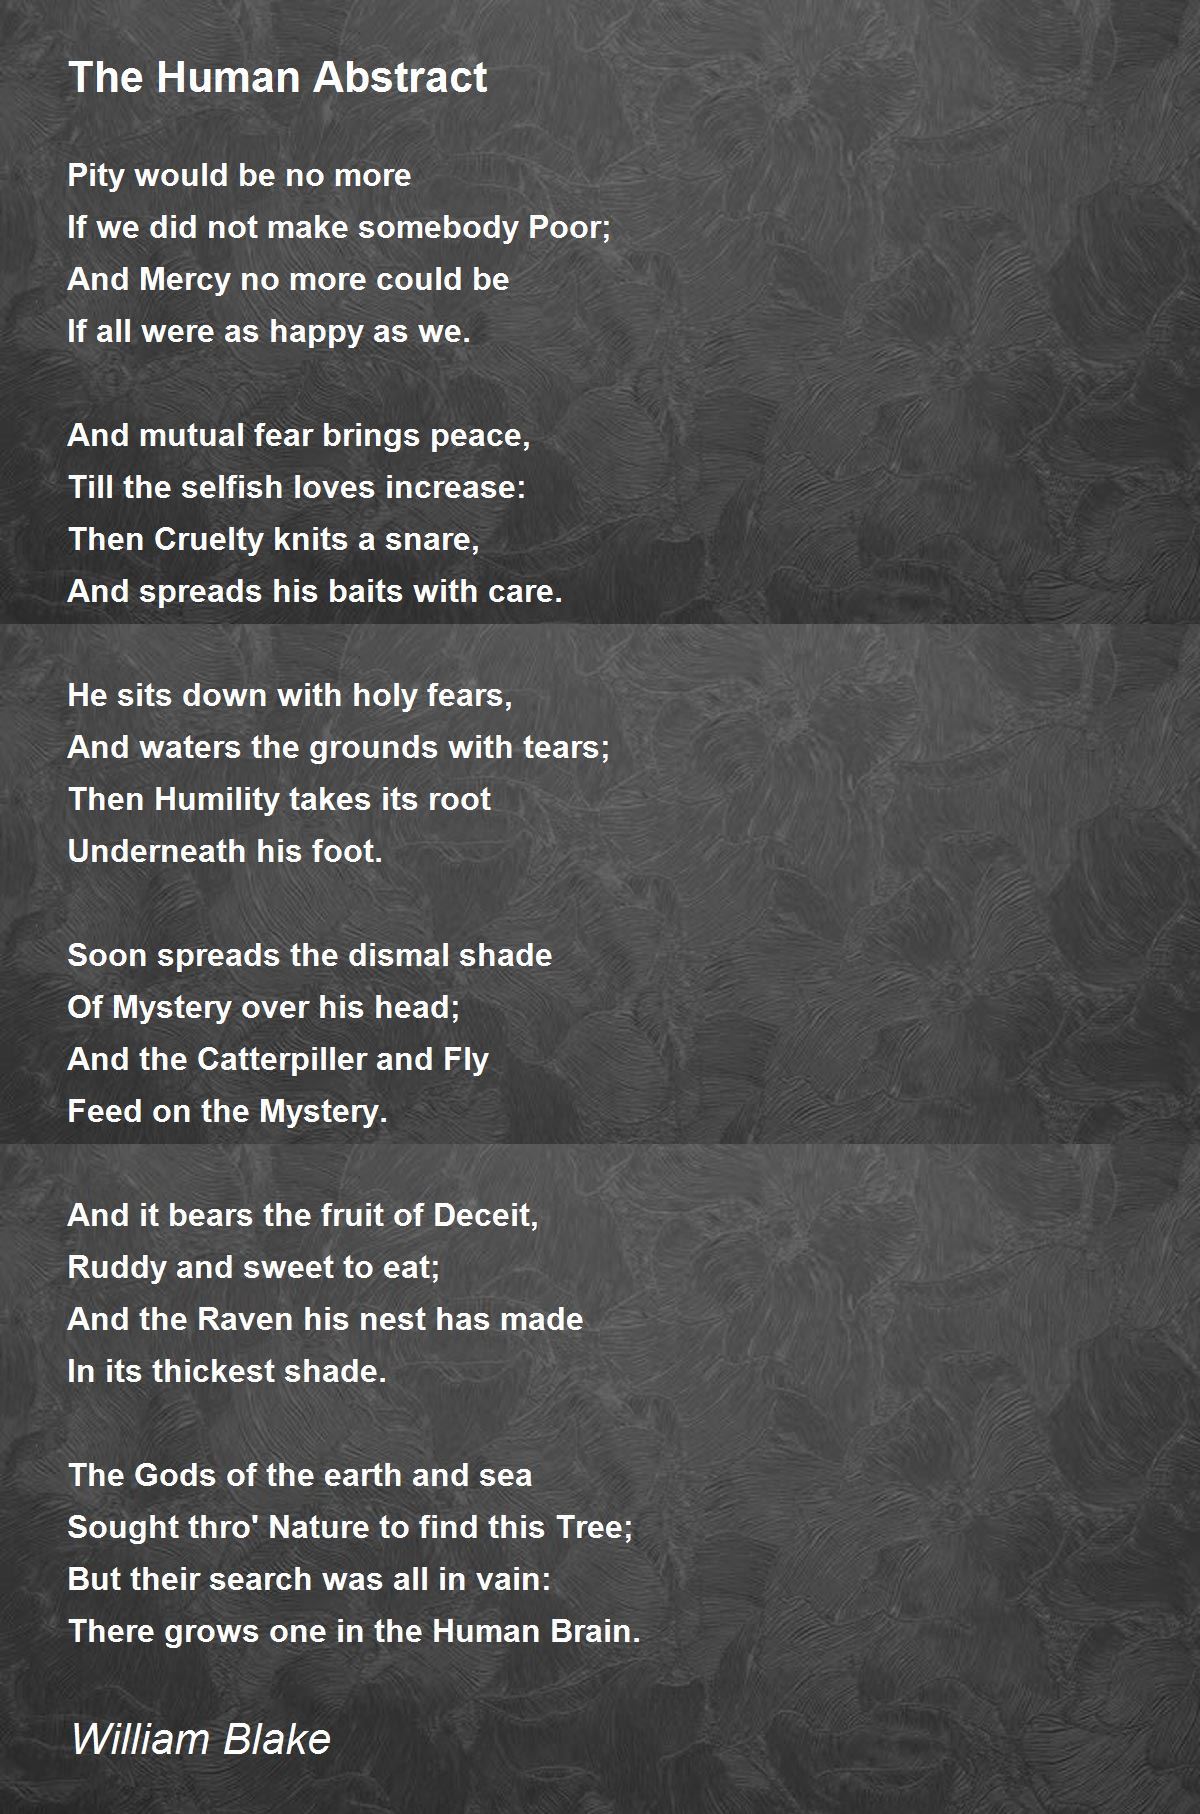 The Human Abstract Poem by William Blake - Poem Hunter 